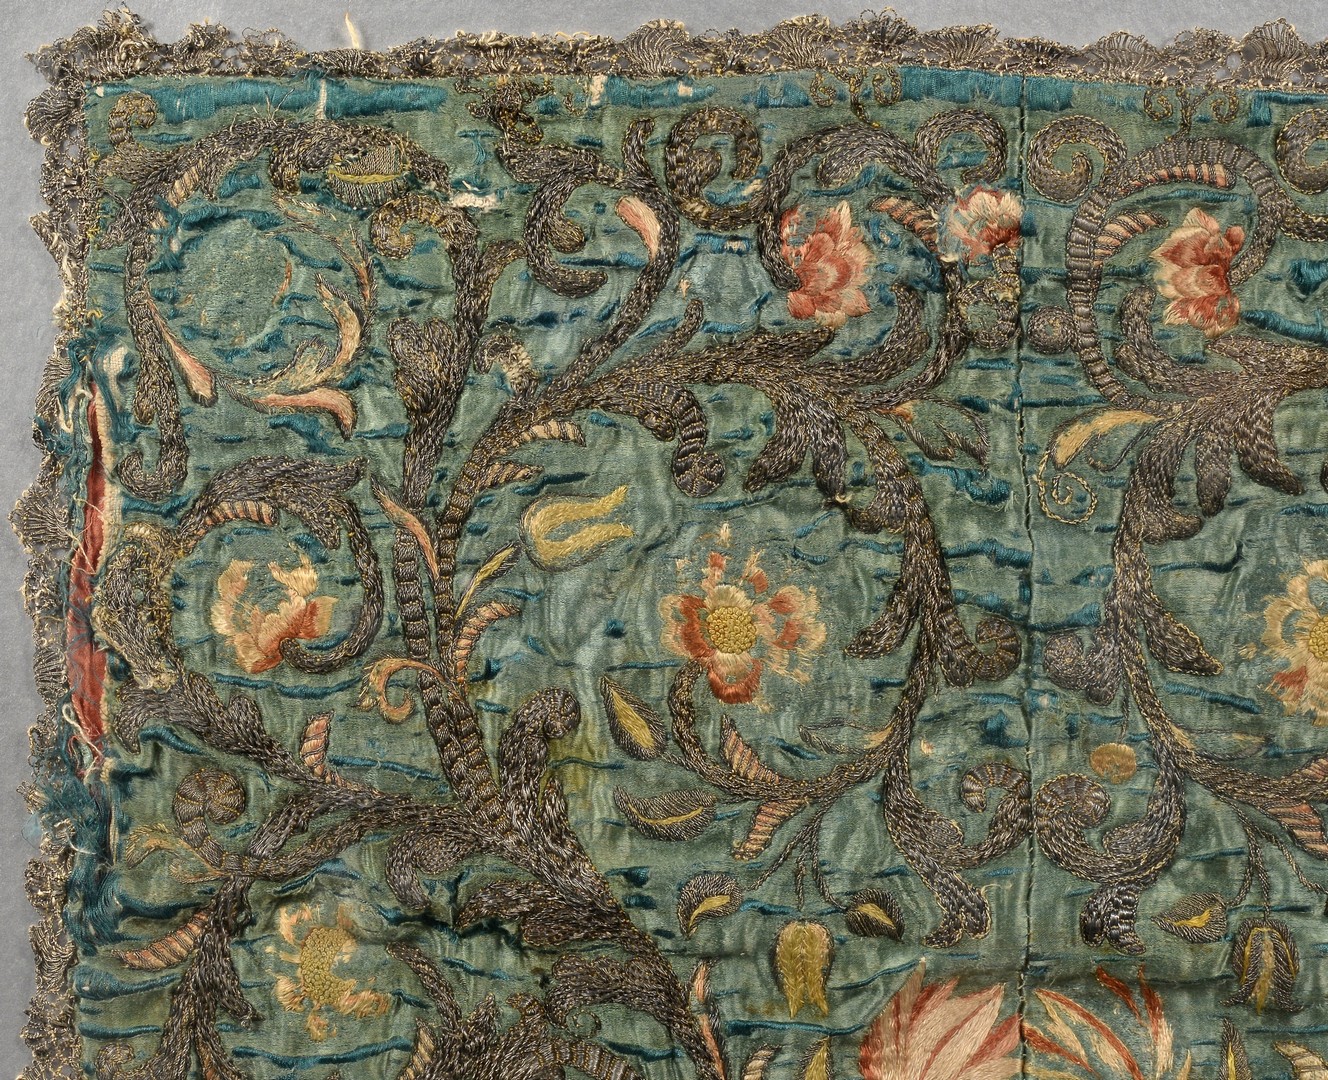 Lot 261: 2 Framed Italian Embroidered Textiles